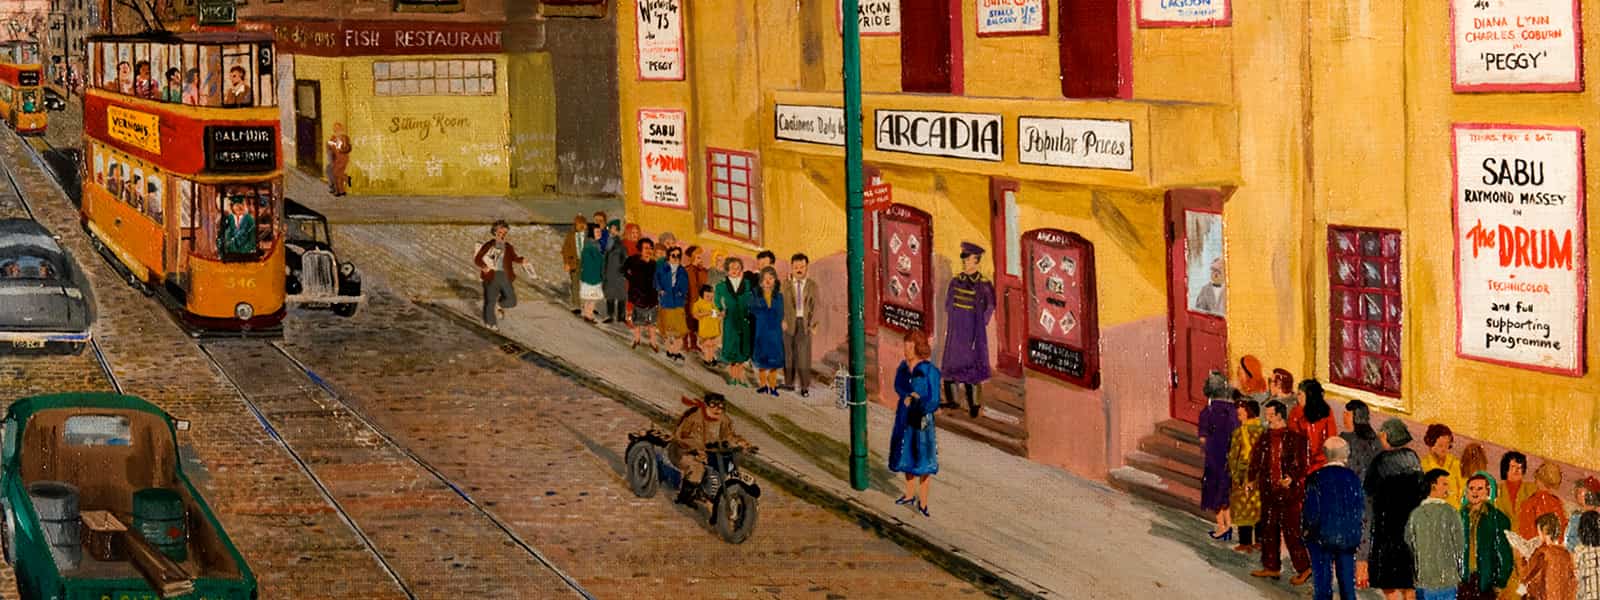 Painting showing street scene in front of Arcadia cinema